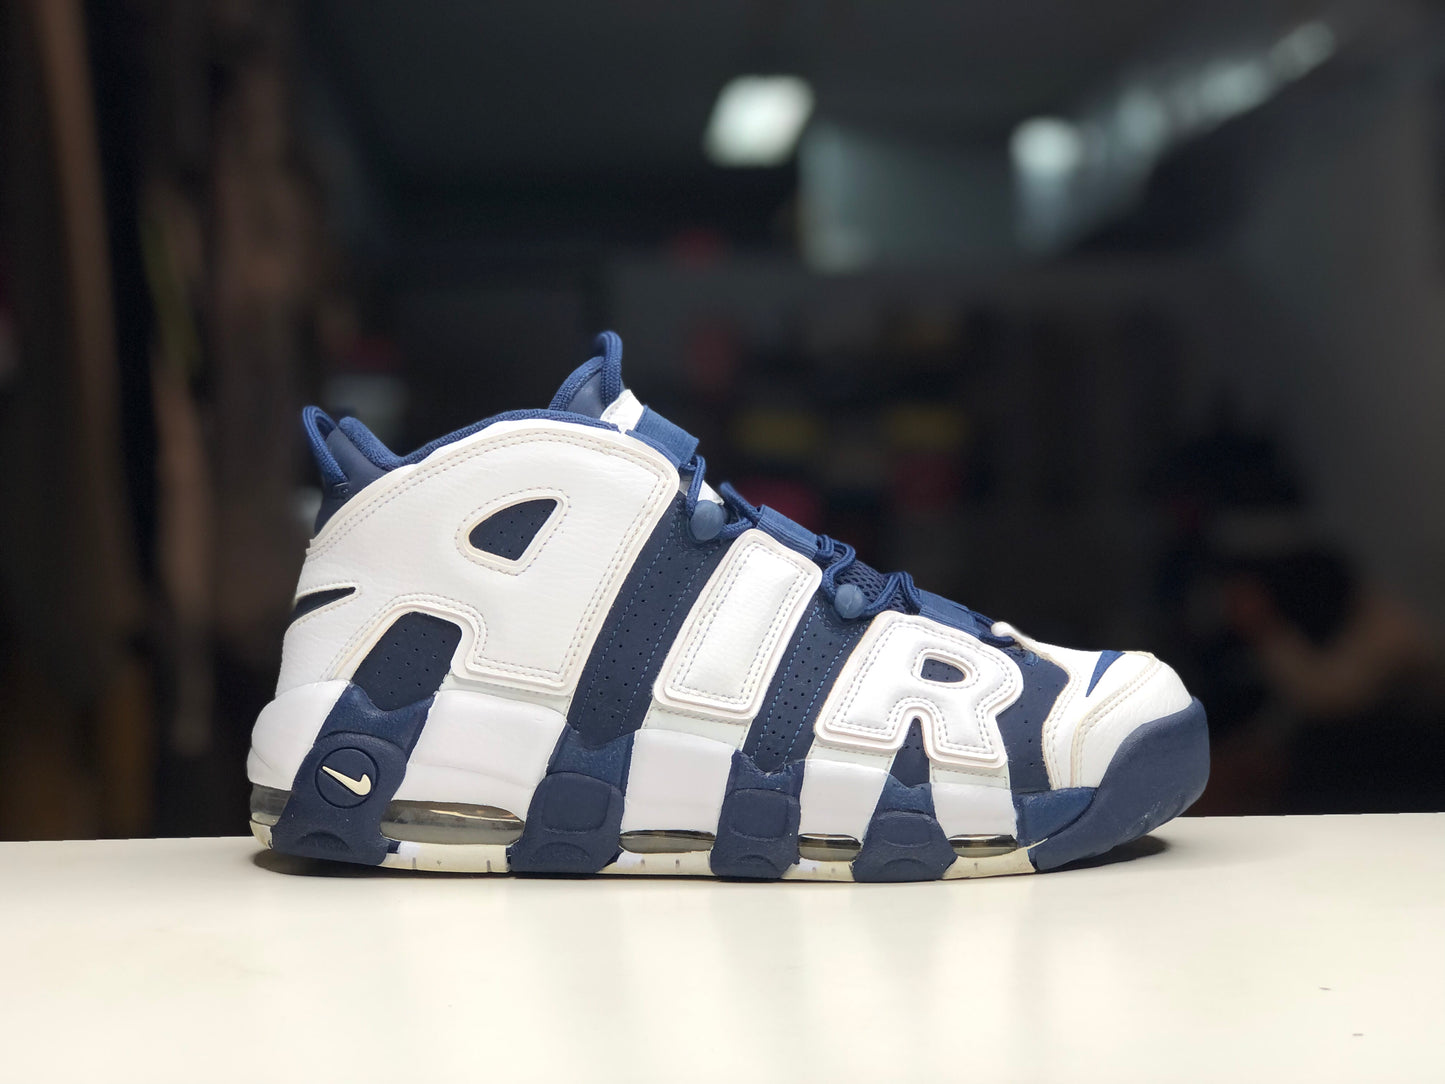 Nike Air Uptempo Olympic size 10.5